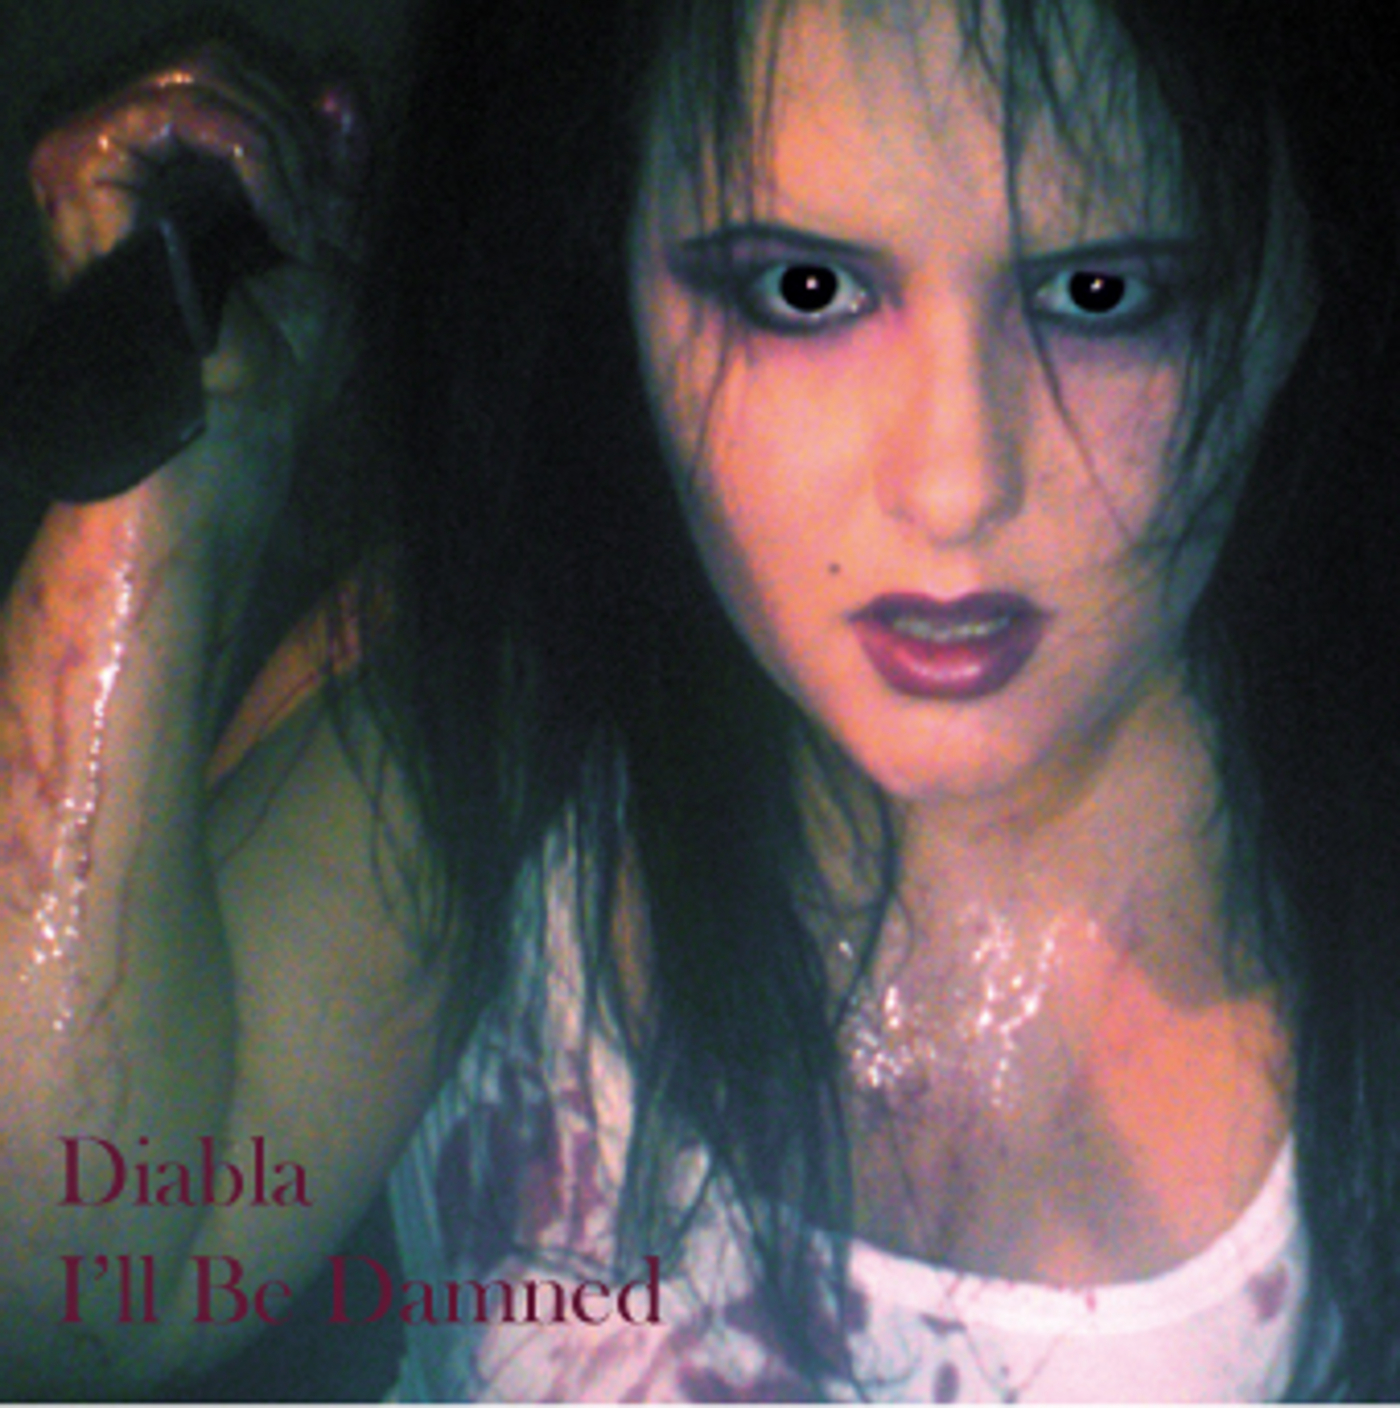 "I'll Be Damned" album cover